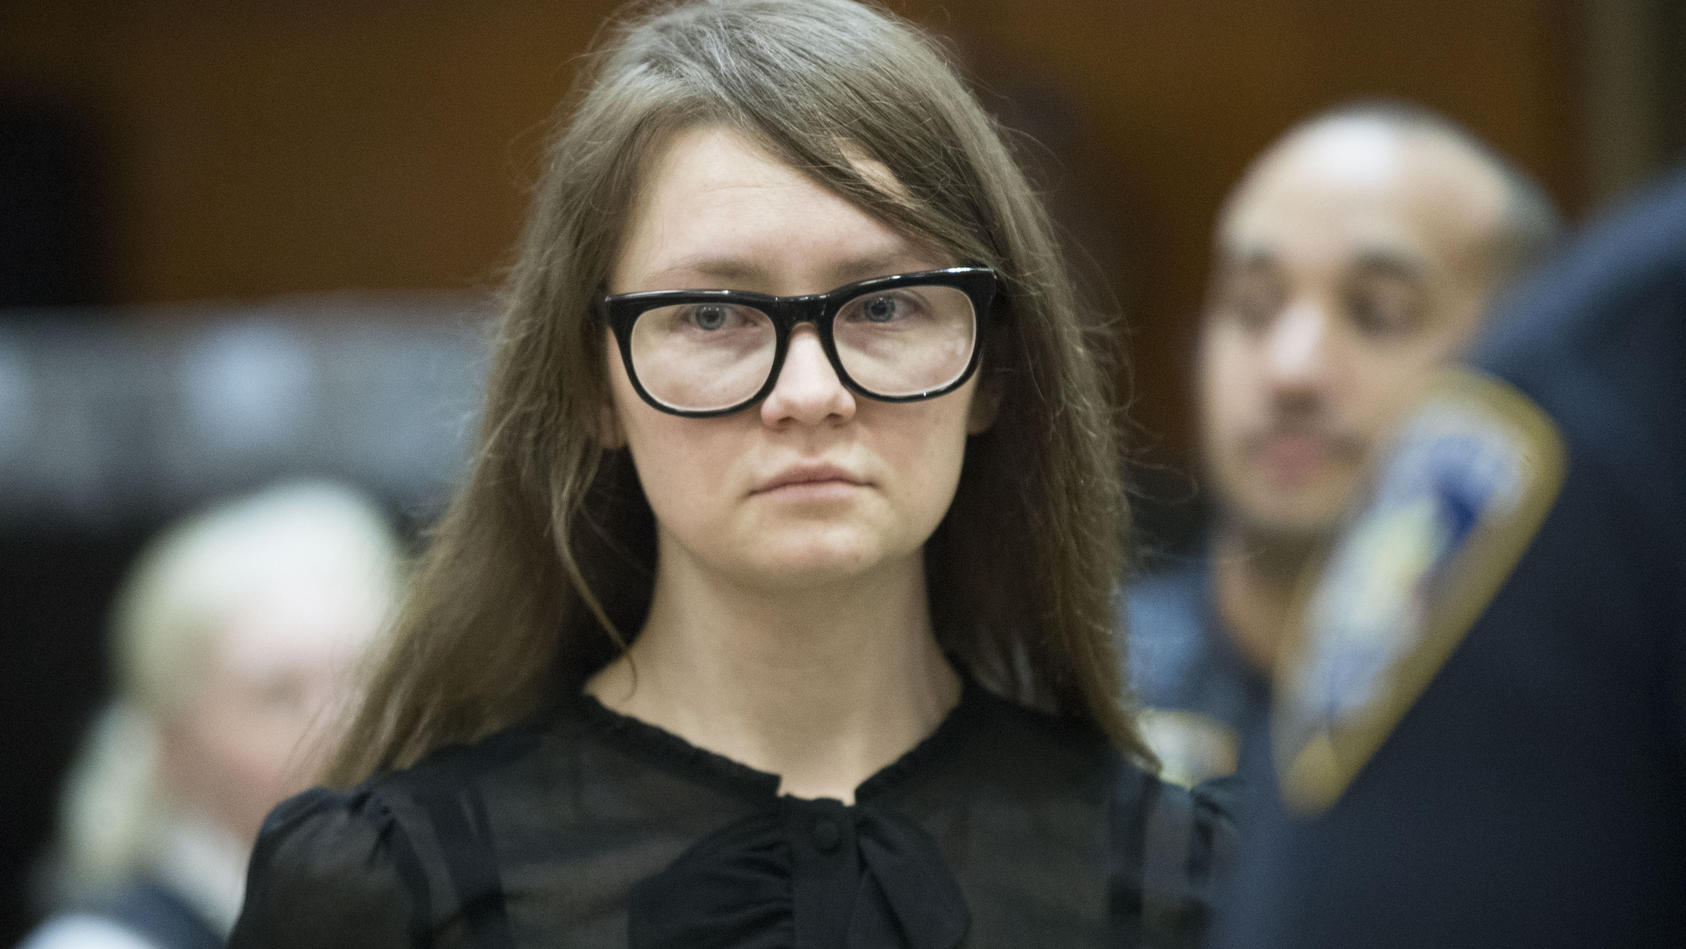 FILE - In this April 25, 2019, file photo, Anna Sorokin, who claimed to be a German heiress, returns to the courtroom during her trial on grand larceny and theft of services charges in New York.    A state website shows that Sorokin was freed into pa